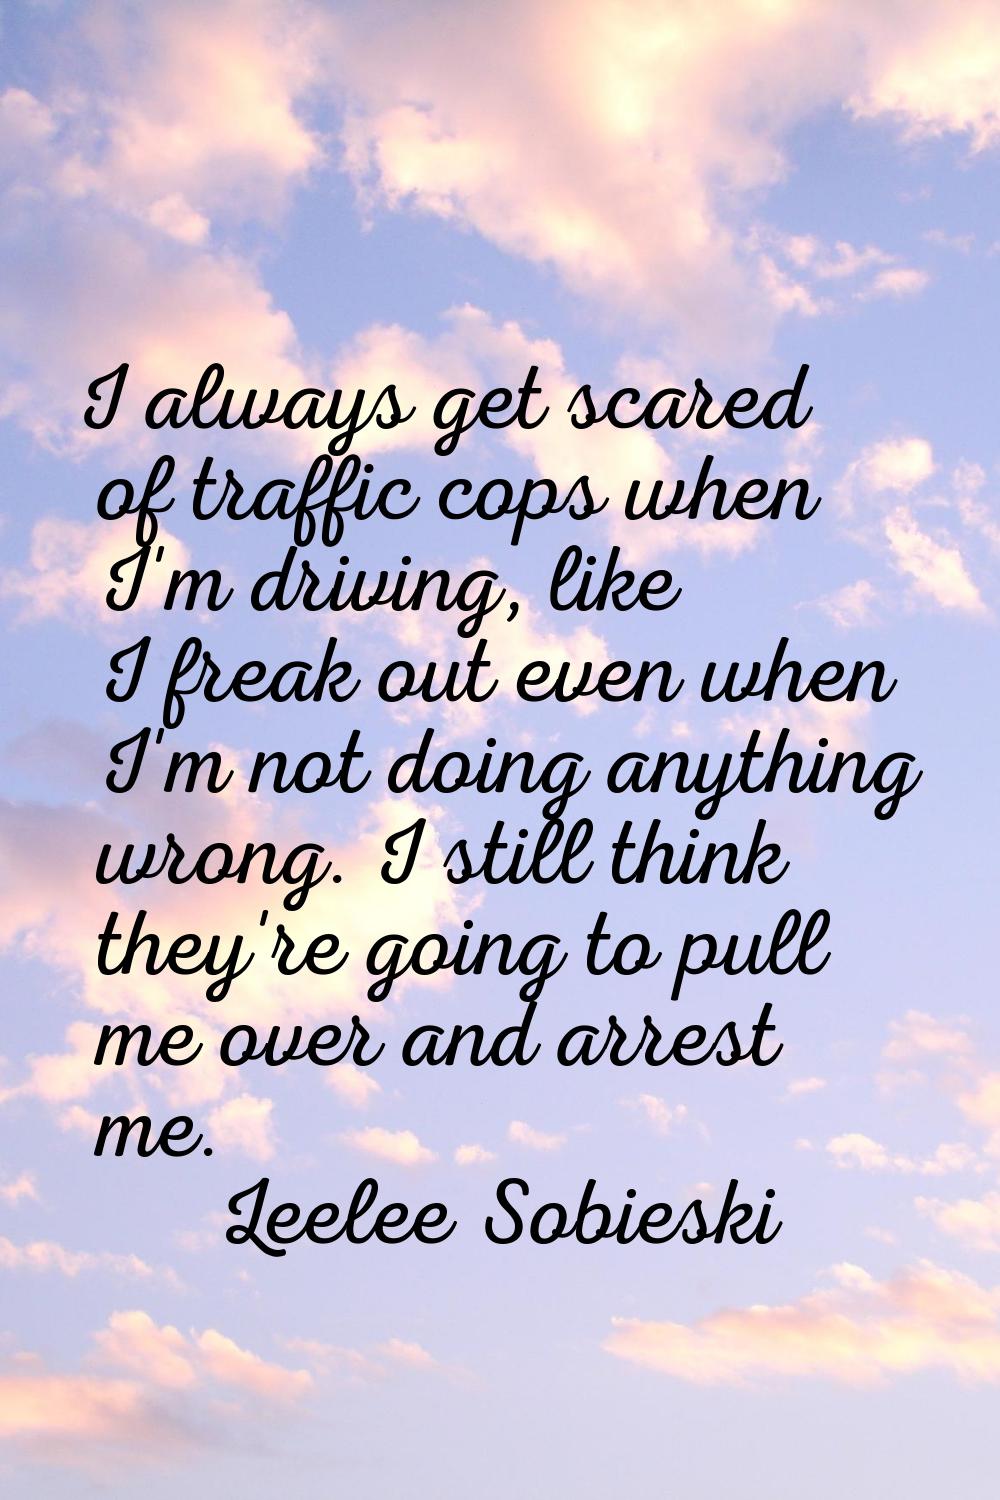 I always get scared of traffic cops when I'm driving, like I freak out even when I'm not doing anyt